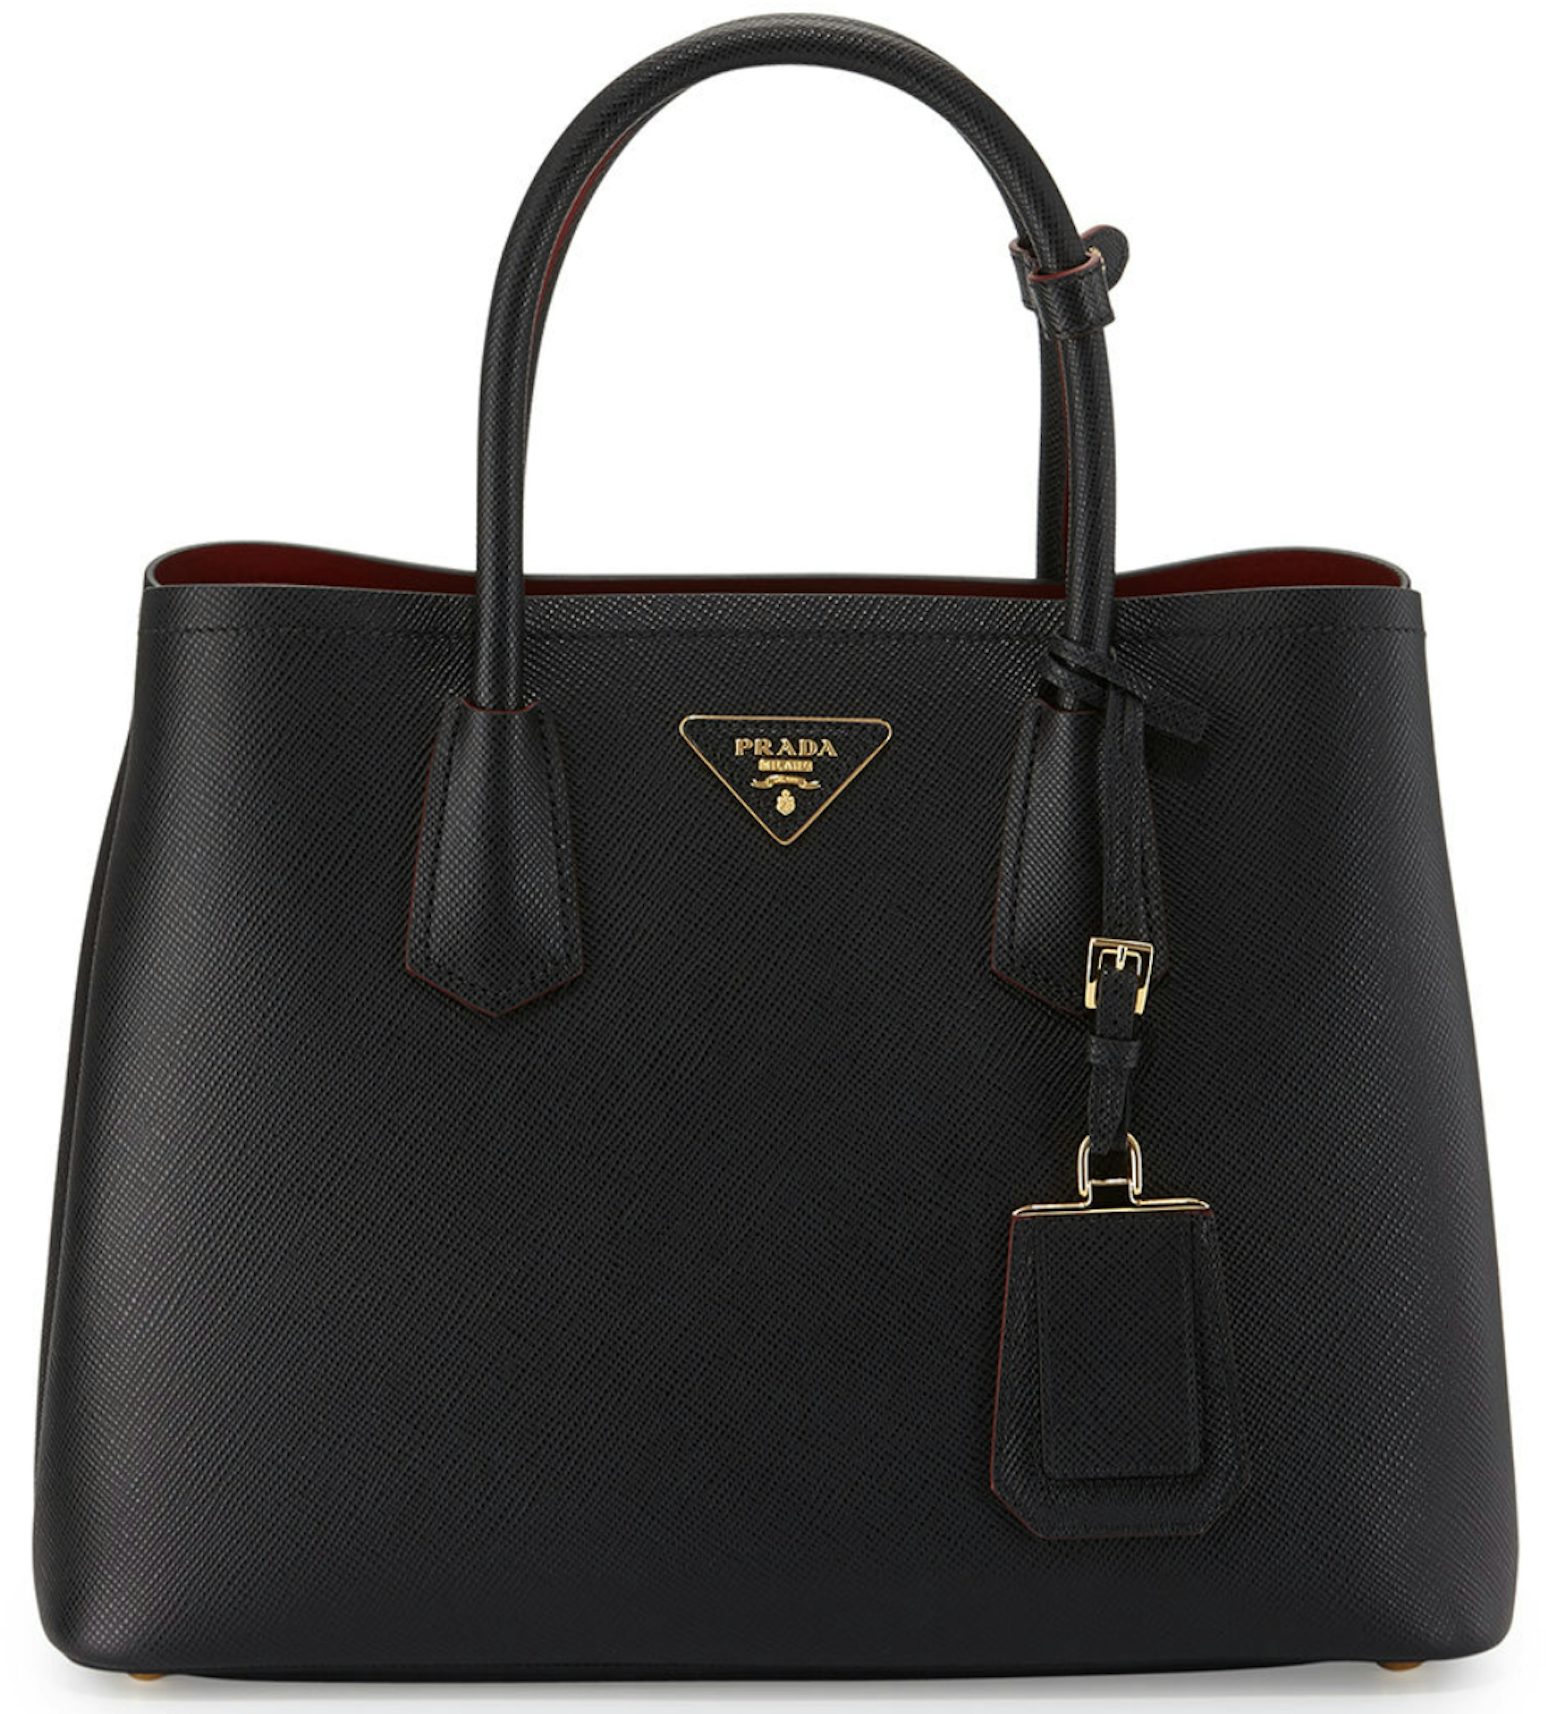 Prada Double Tote Medium Black/Red in Saffiano Leather with Gold-tone - US